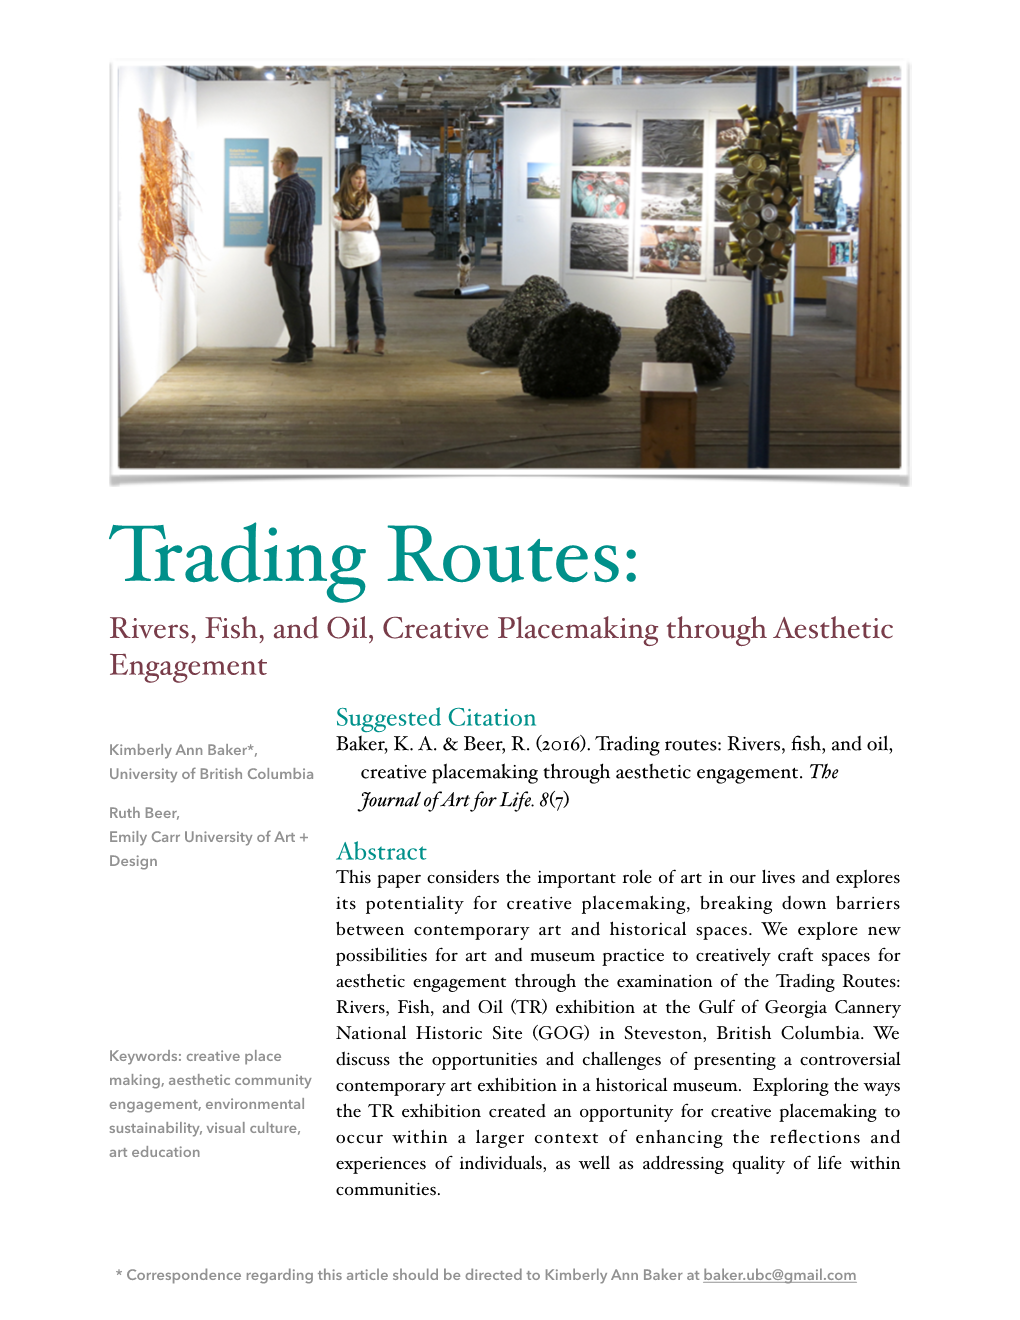 Trading Routes: Rivers, Fish, and Oil, Creative Placemaking Through Aesthetic Engagement Suggested Citation Kimberly Ann Baker*, Baker, K